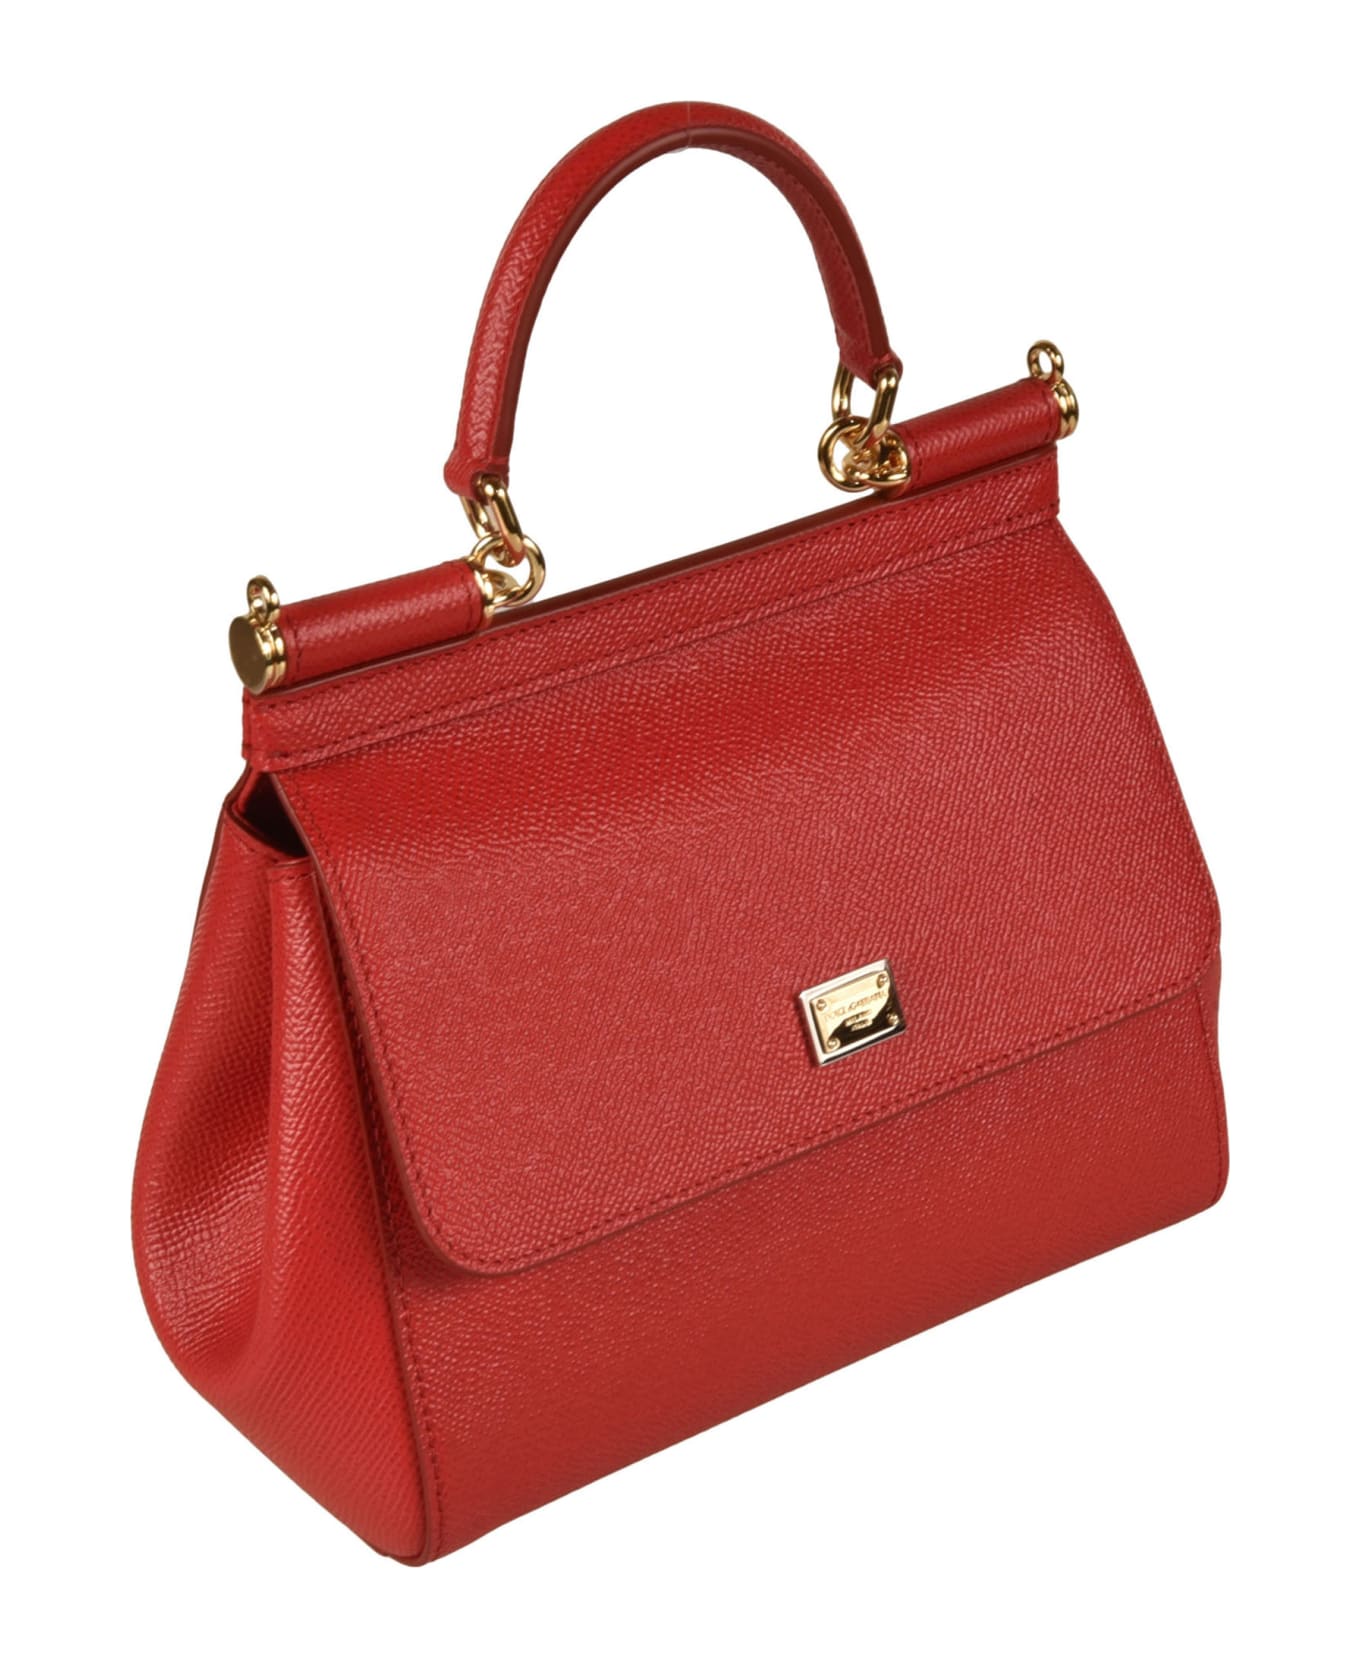 Dolce & Gabbana Miss Sicily Tote - Red